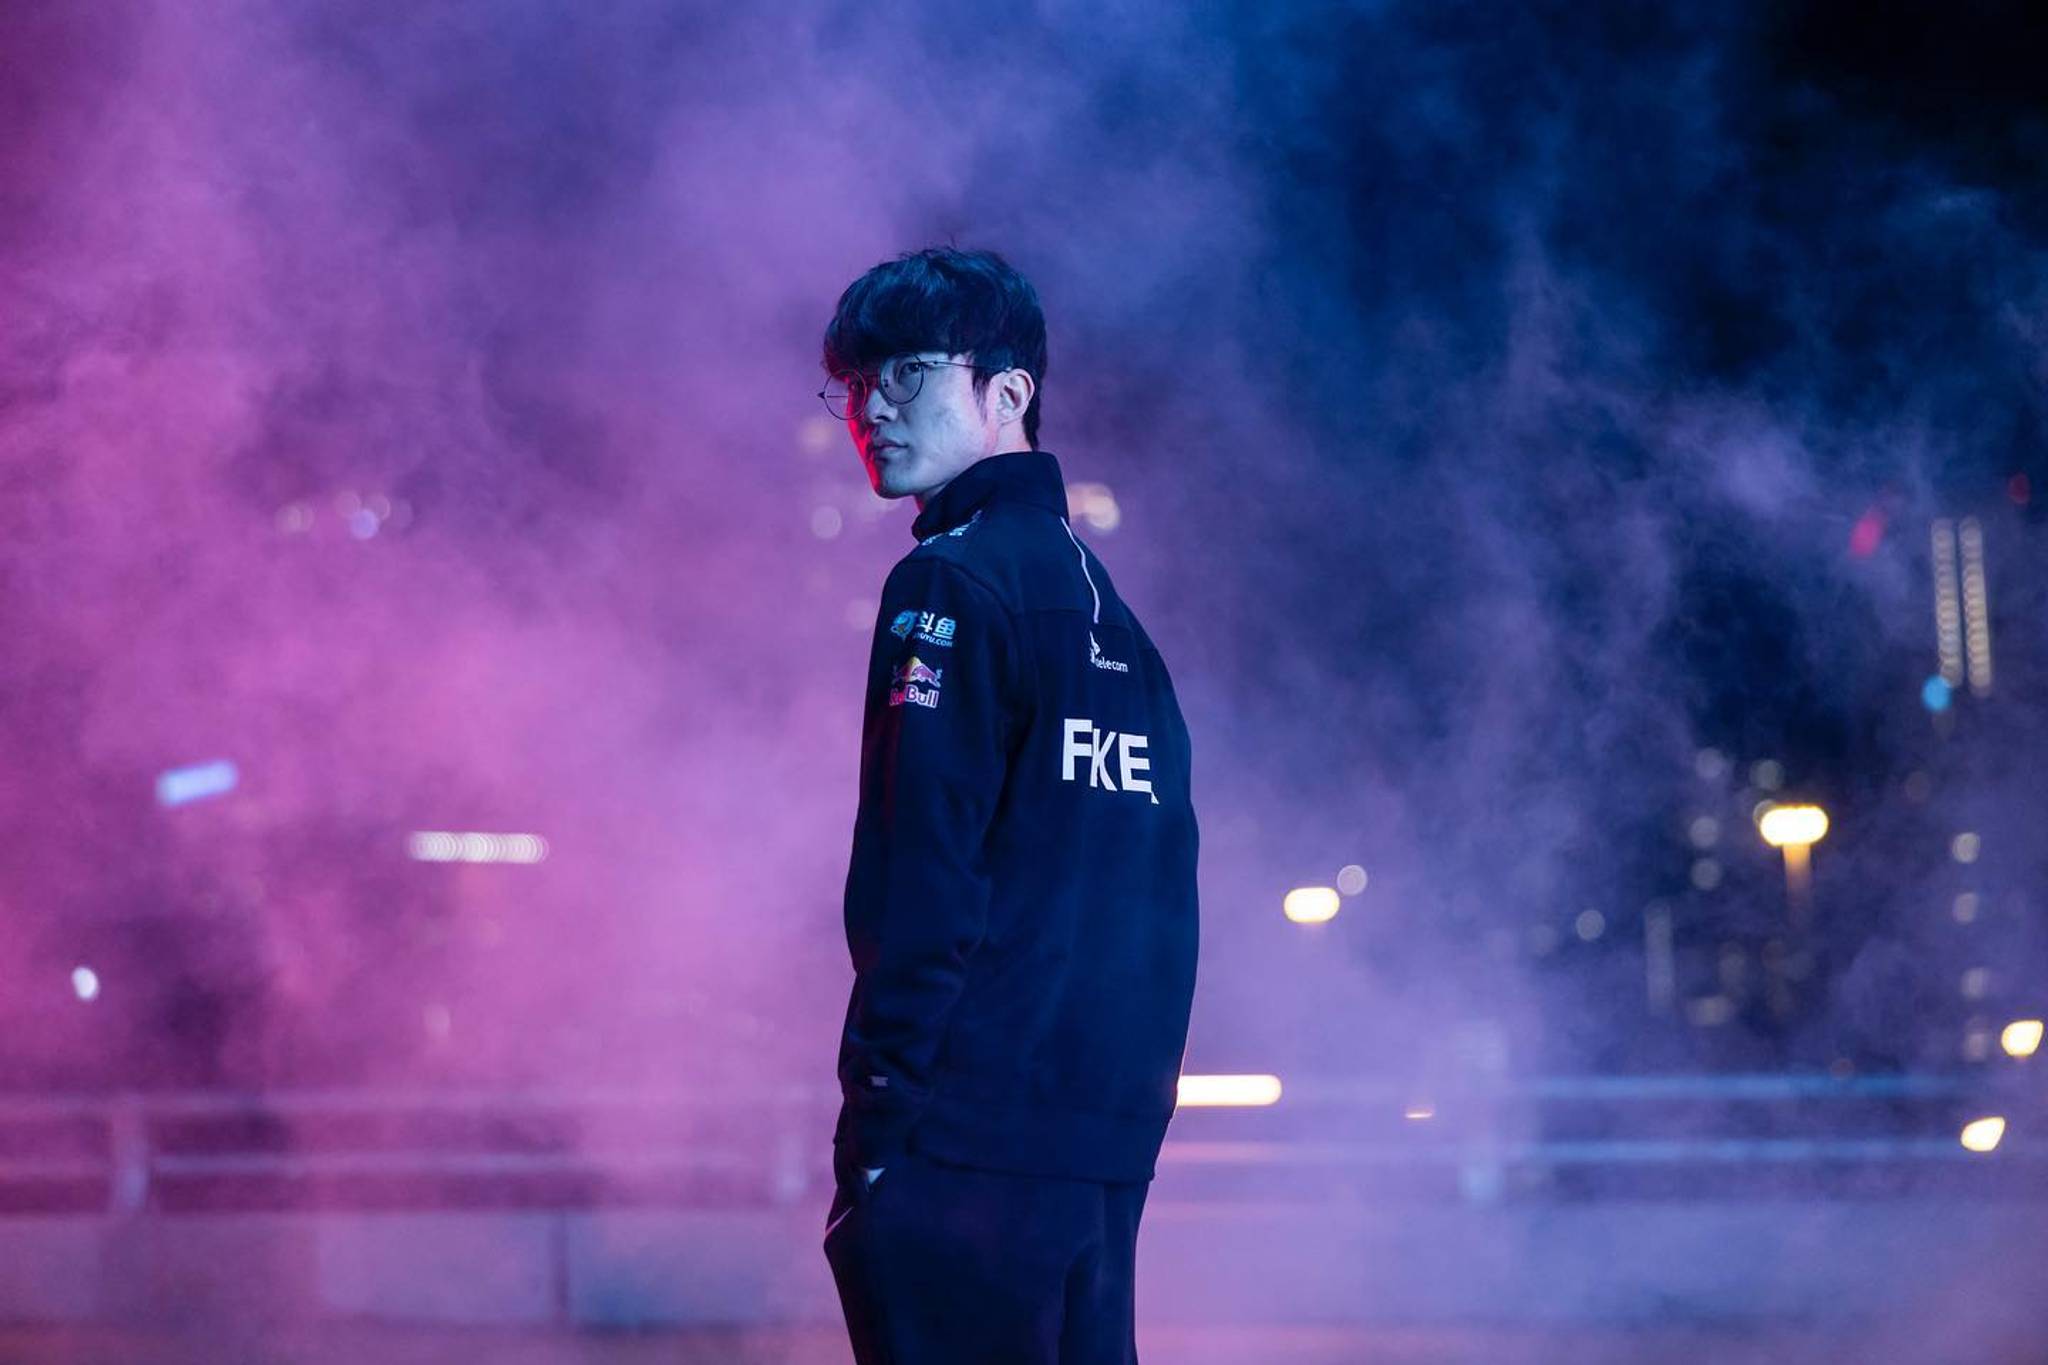 How T1’s Faker leads a global league of esports fans